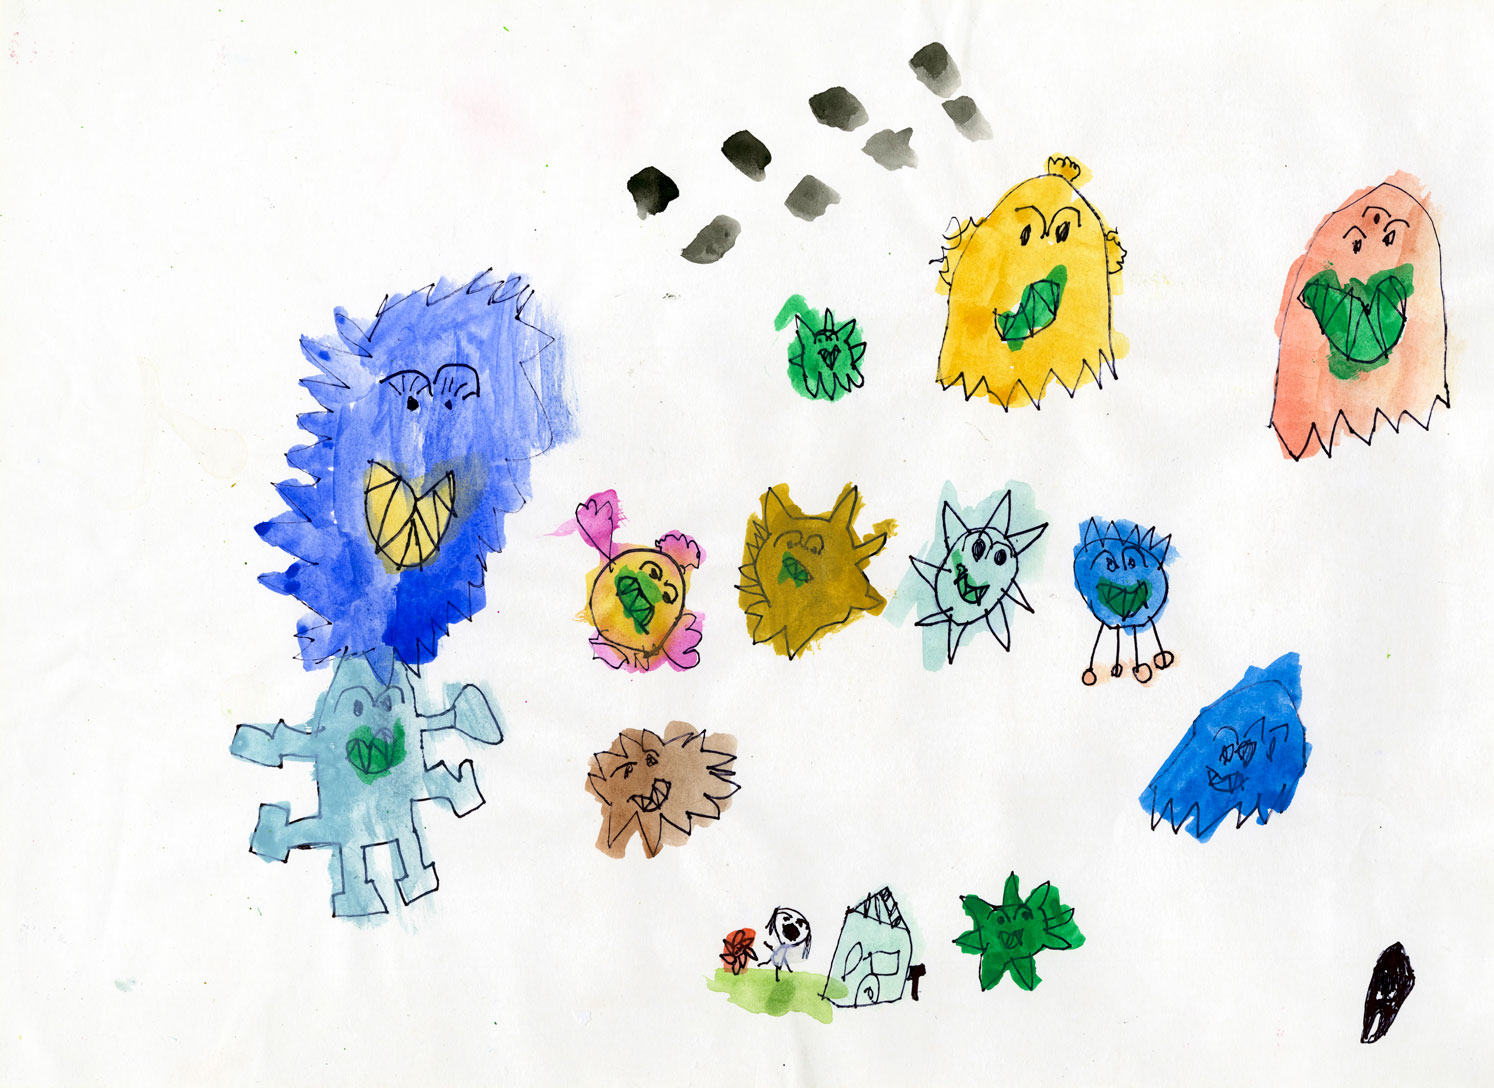 Zoe, age 5, I have to stay at home for a while, I was just drawing some of the corona virus. Courtesy the artist and Gallery of Children’s Art (GoCA).